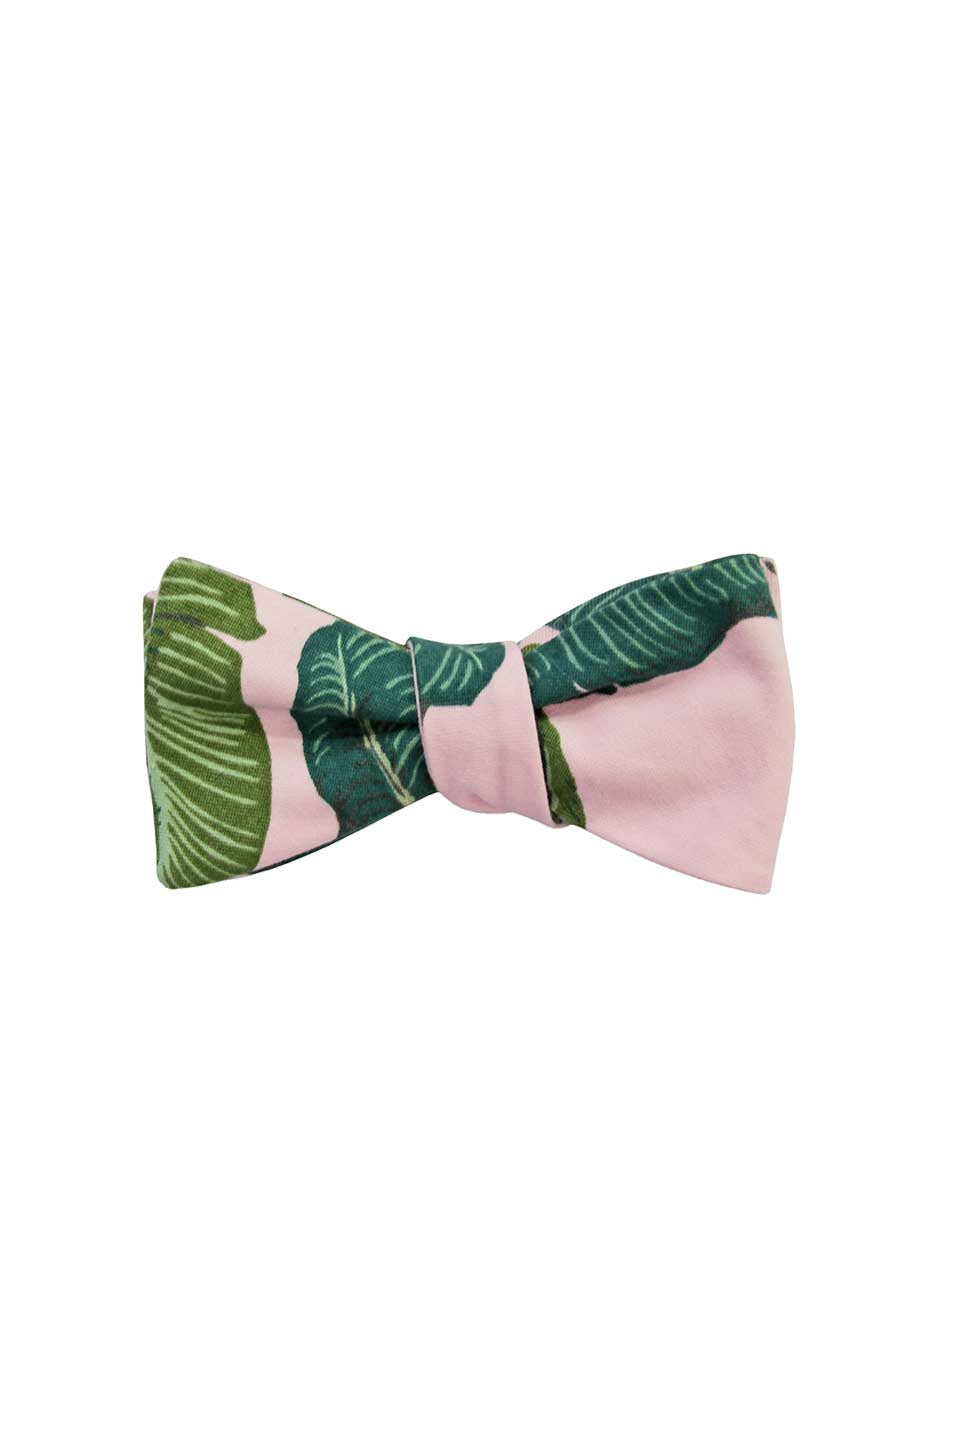 THE BEV TROPICAL BOW TIE